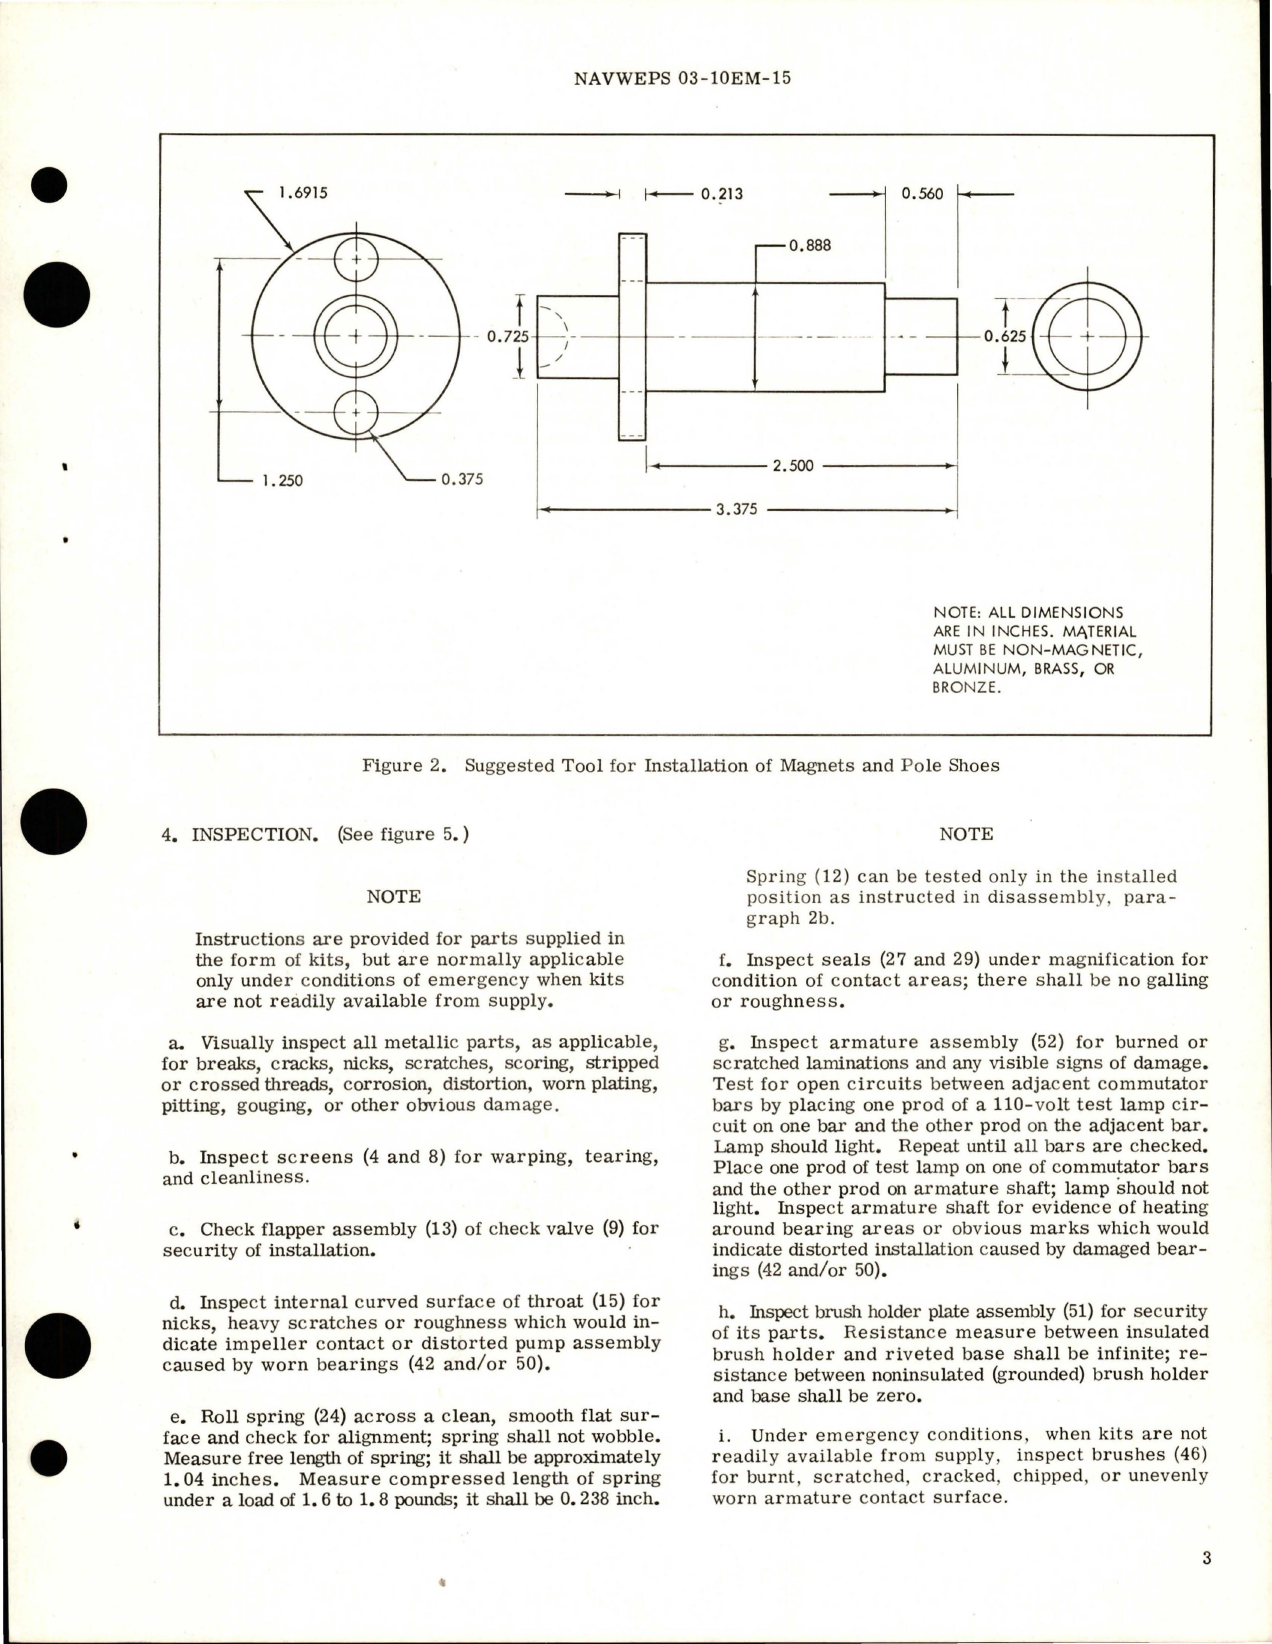 Sample page 5 from AirCorps Library document: Overhaul Instructions with Parts for Fuel Booster Pump - Part 56881